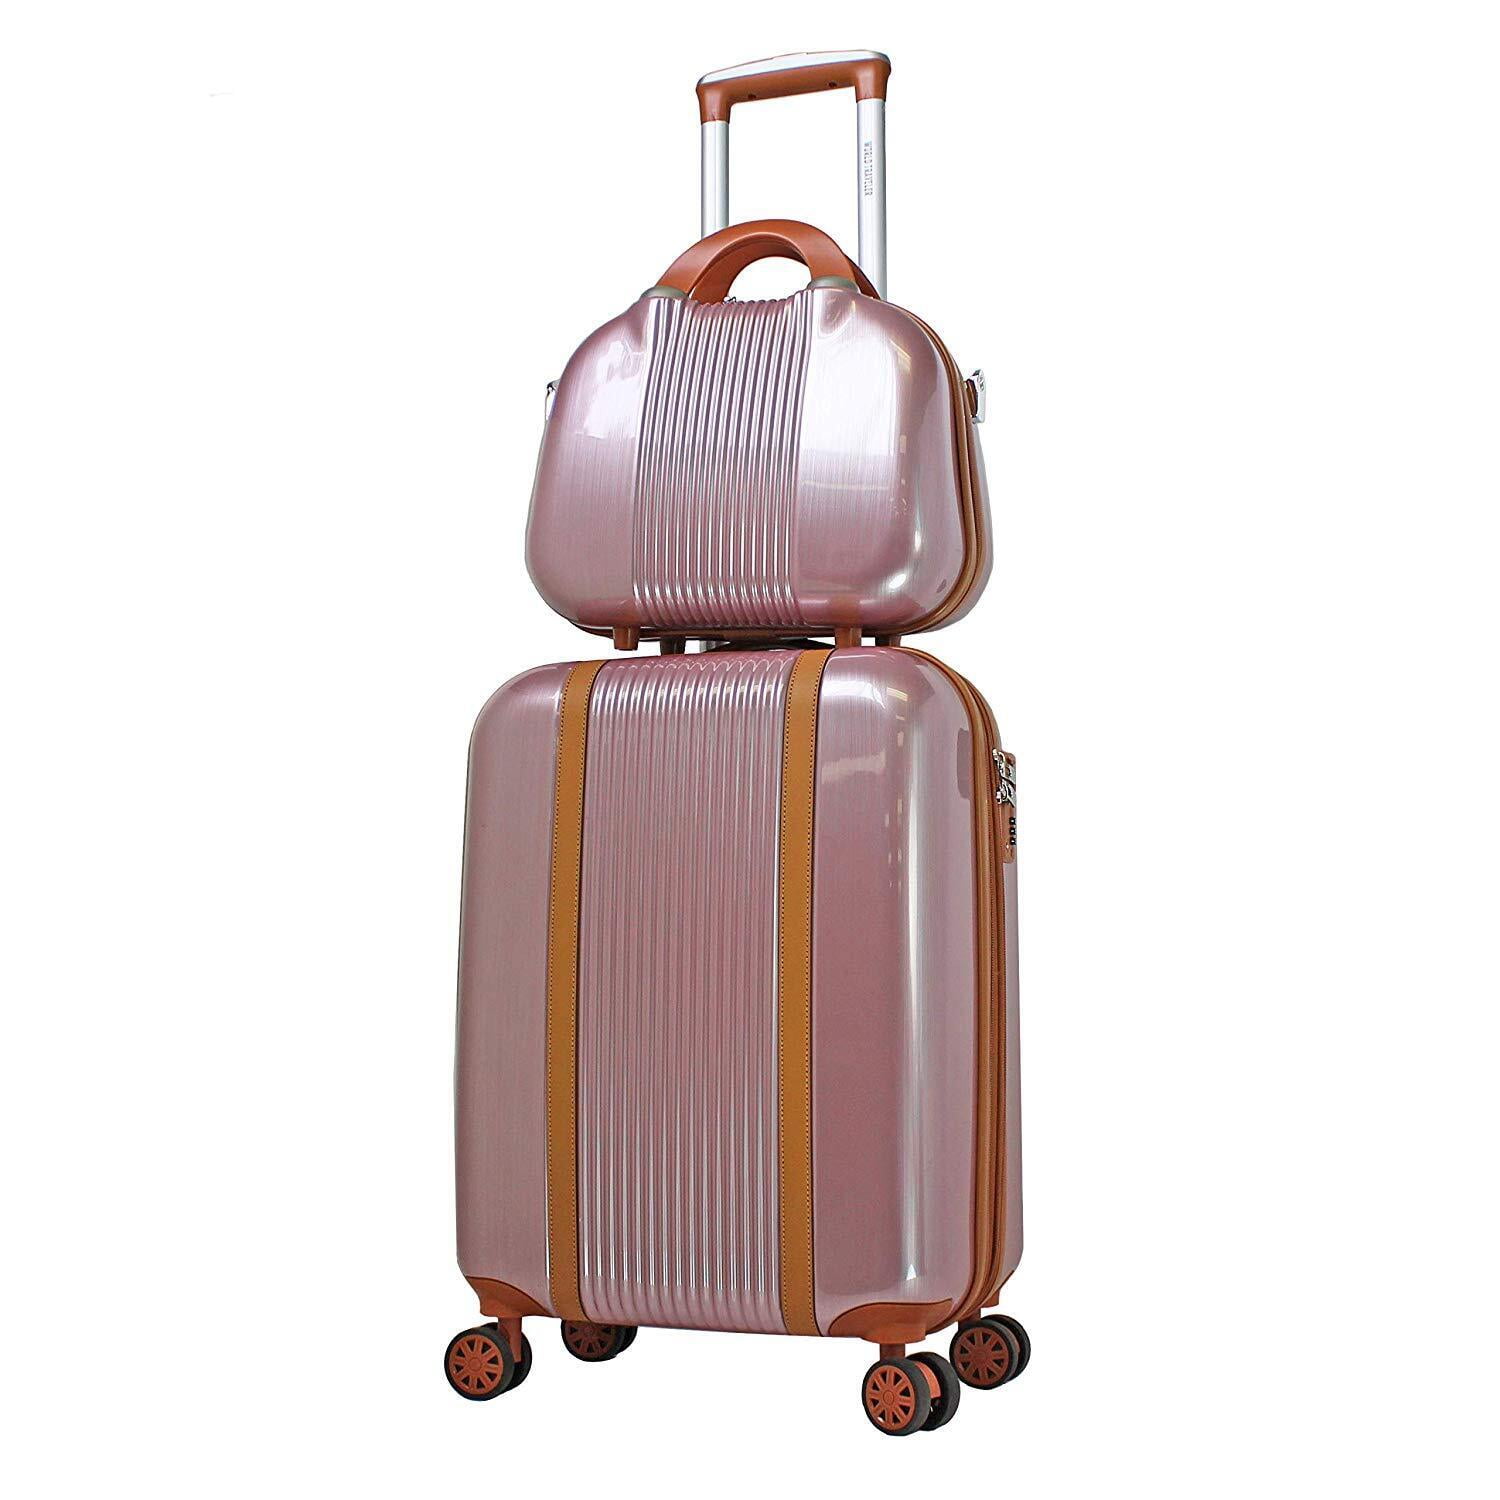 A lightweight Upright Work Travel Hand Luggage Shoulder Bag With 5 Sections. 